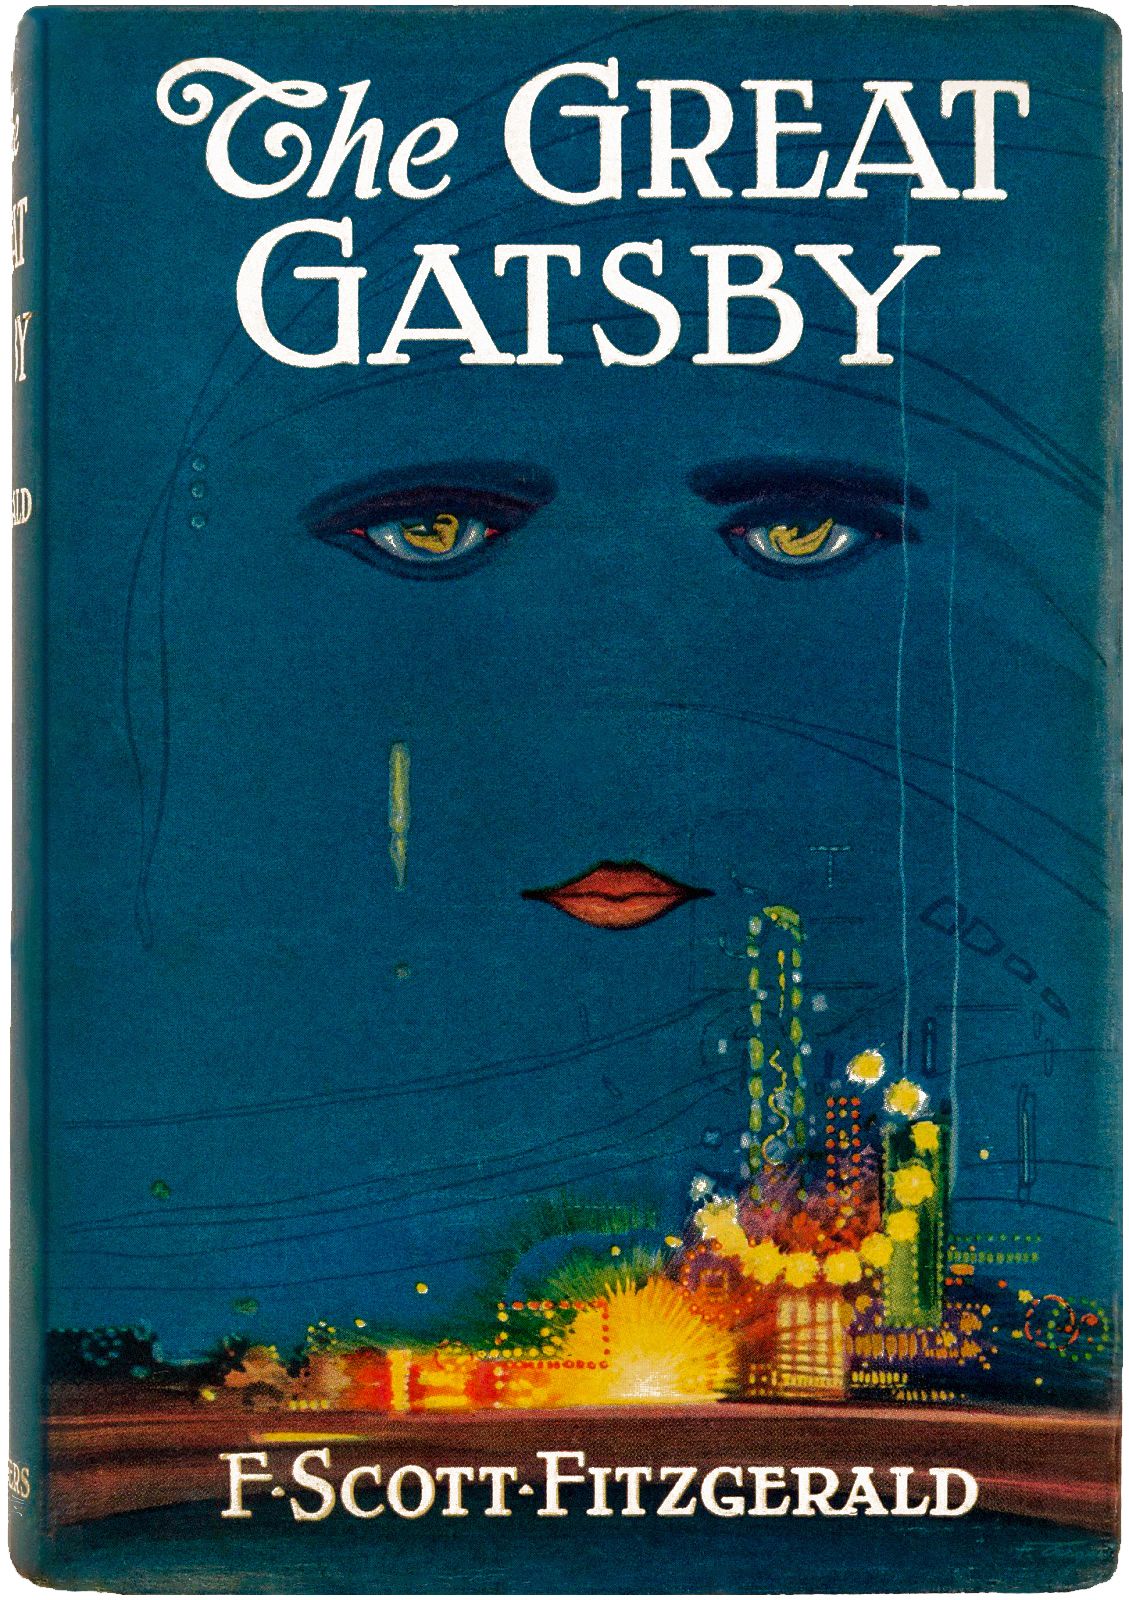 The 1925 Edition of The Great Gatsby.